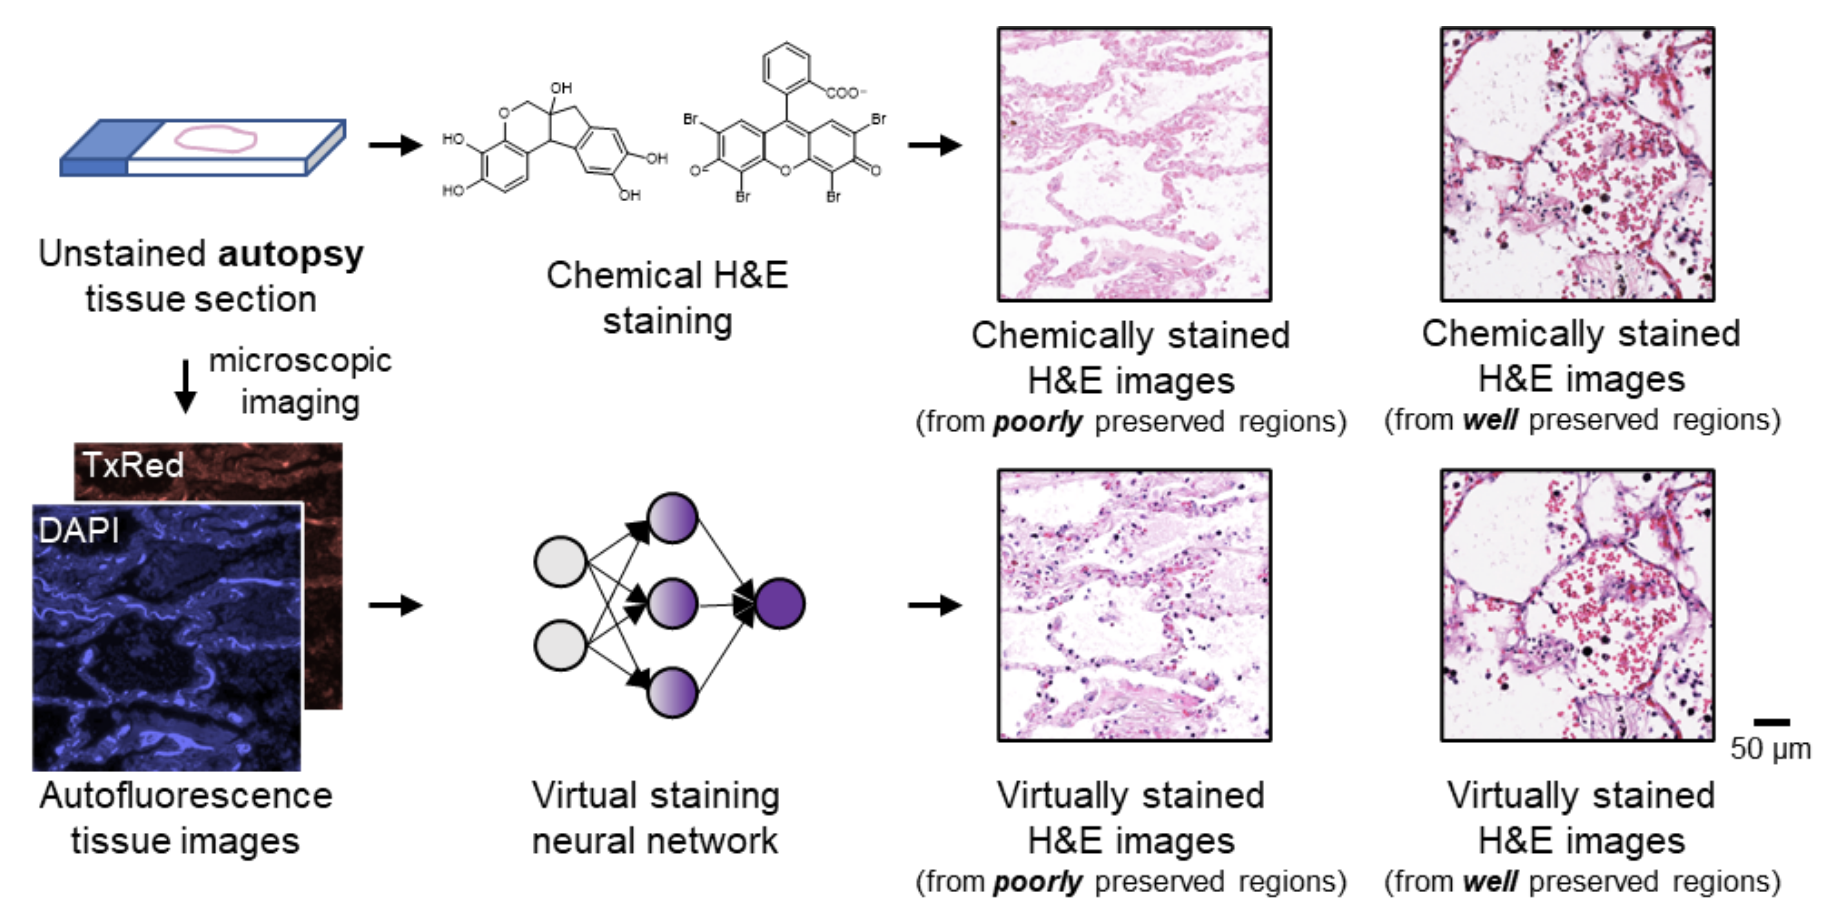 Virtual staining of label-free autopsy tissue sections via deep learning